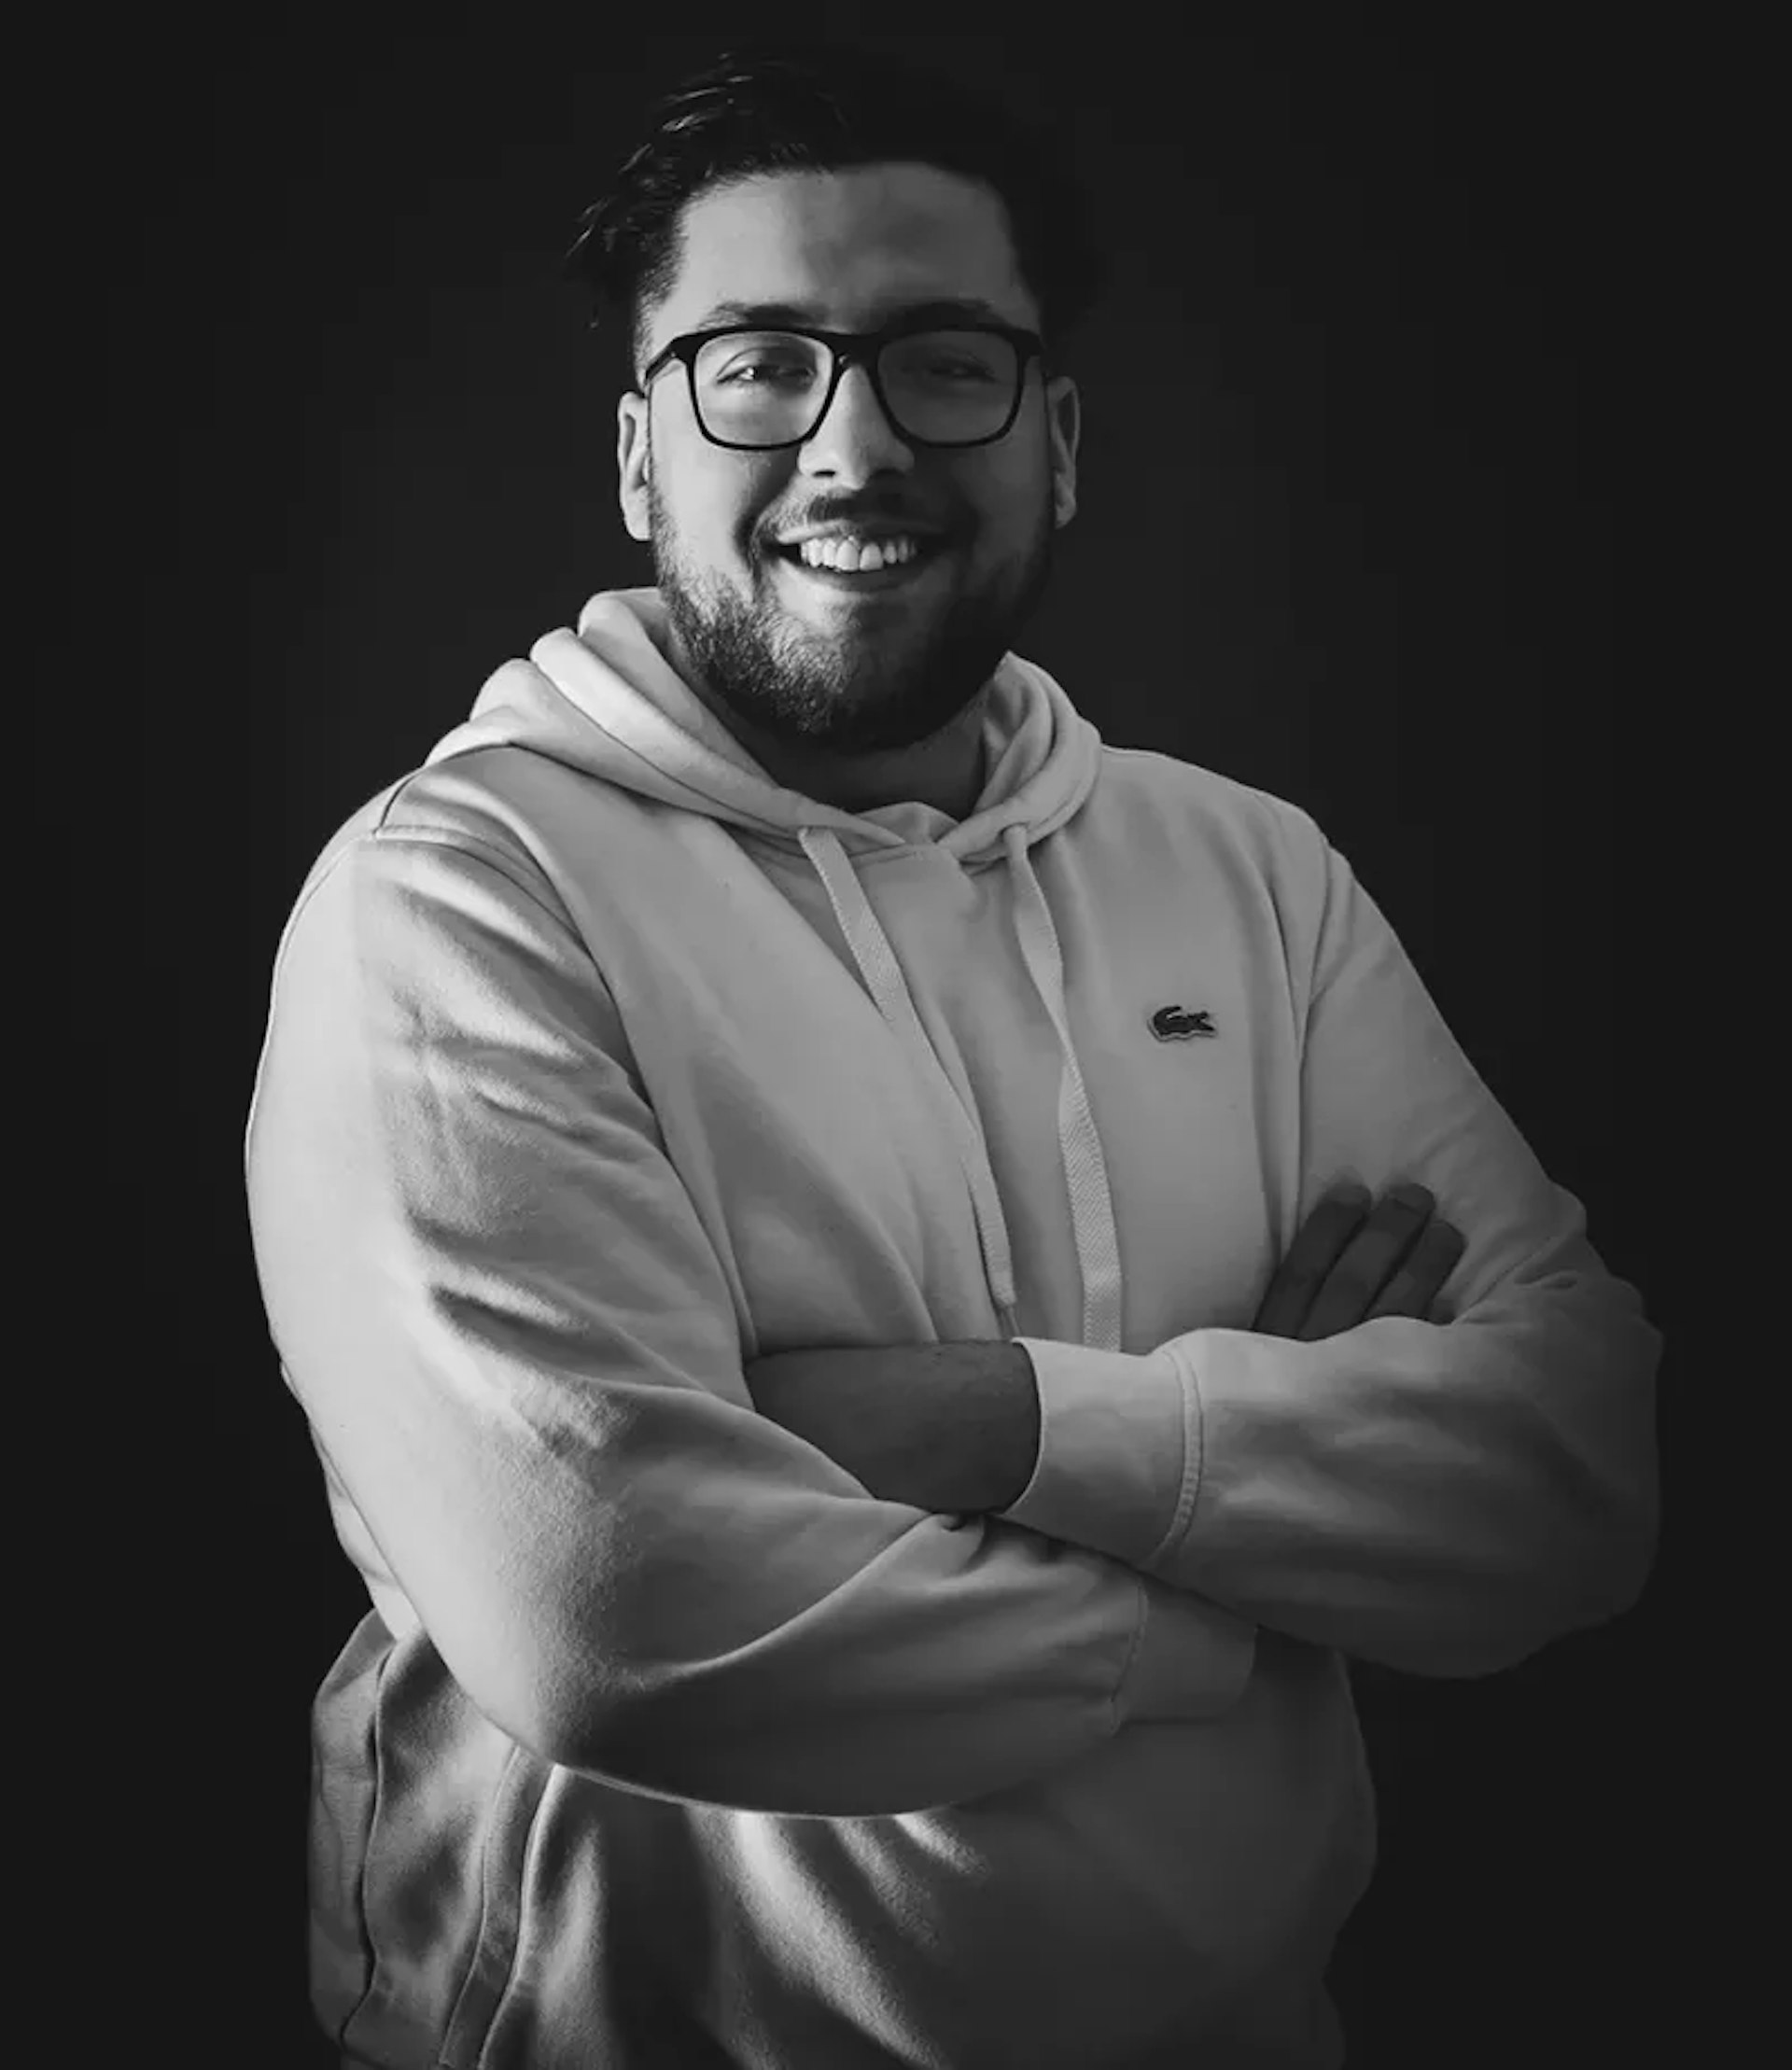 Portrait of Mehdi Mele from the Marvelous team, Digital Project manager and SEO specialist